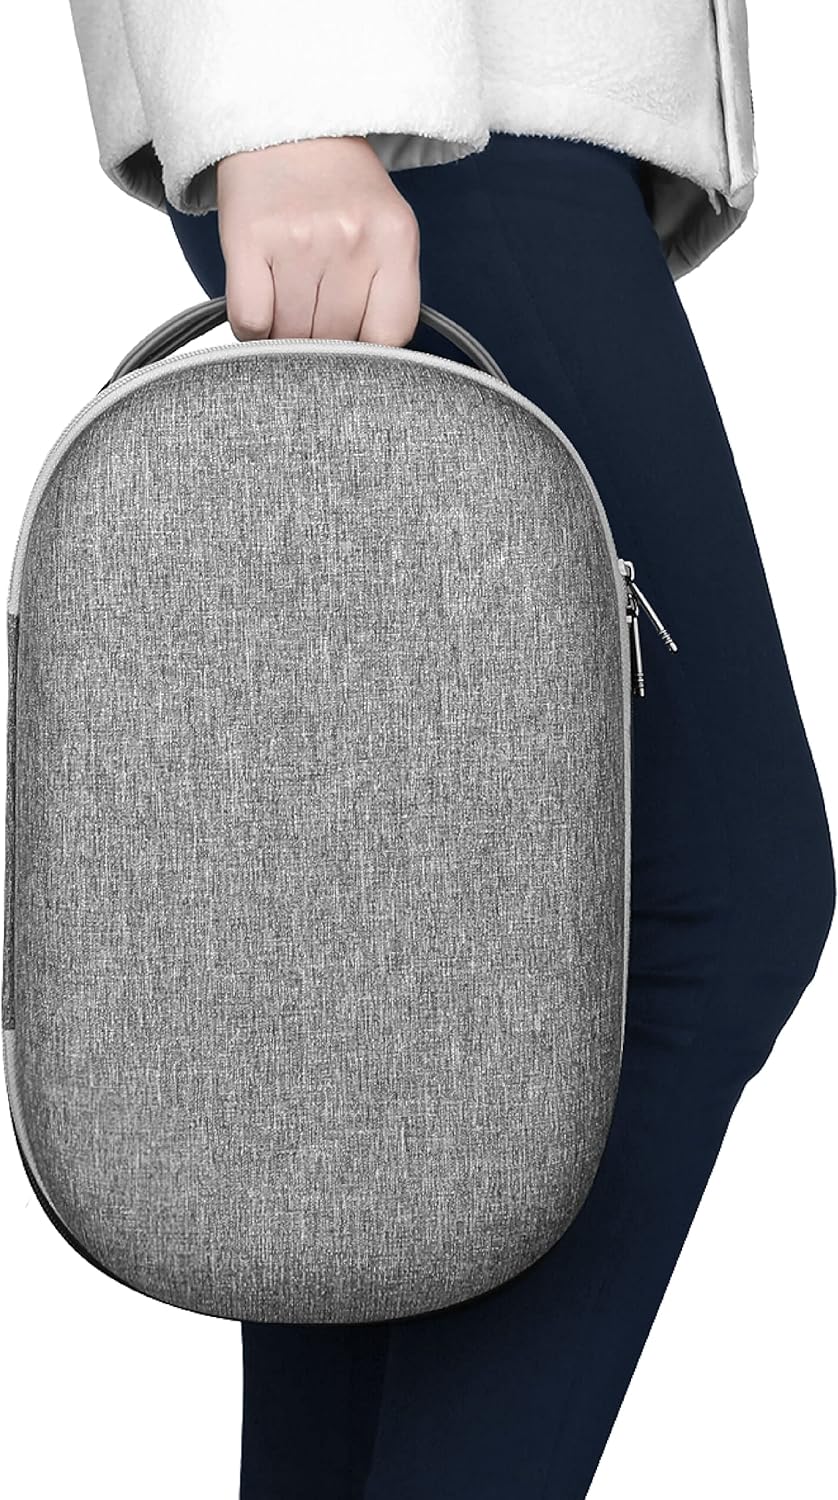 Blupebble Pebble Lightweight and Portable Carry Case Design Made for Meta Quest 2